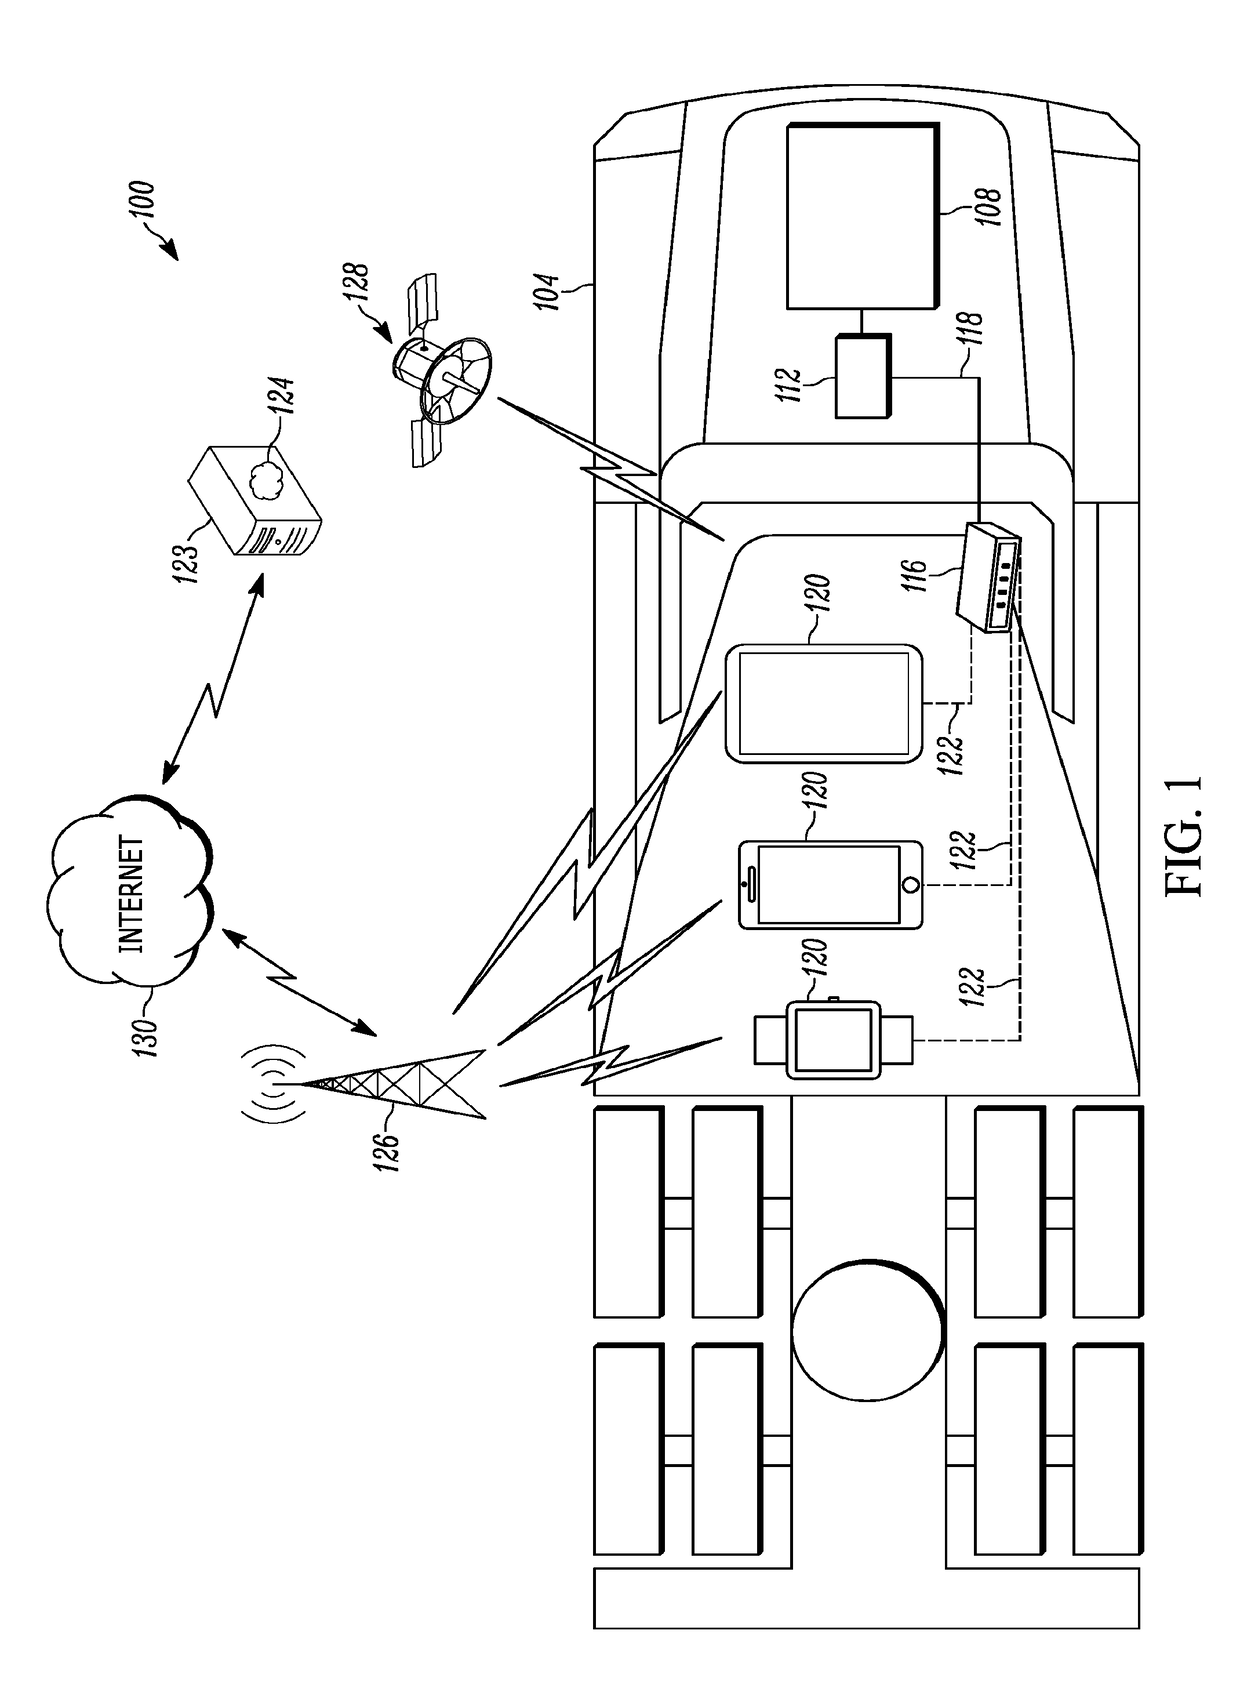 Method and system for authenticating a driver for driver compliance